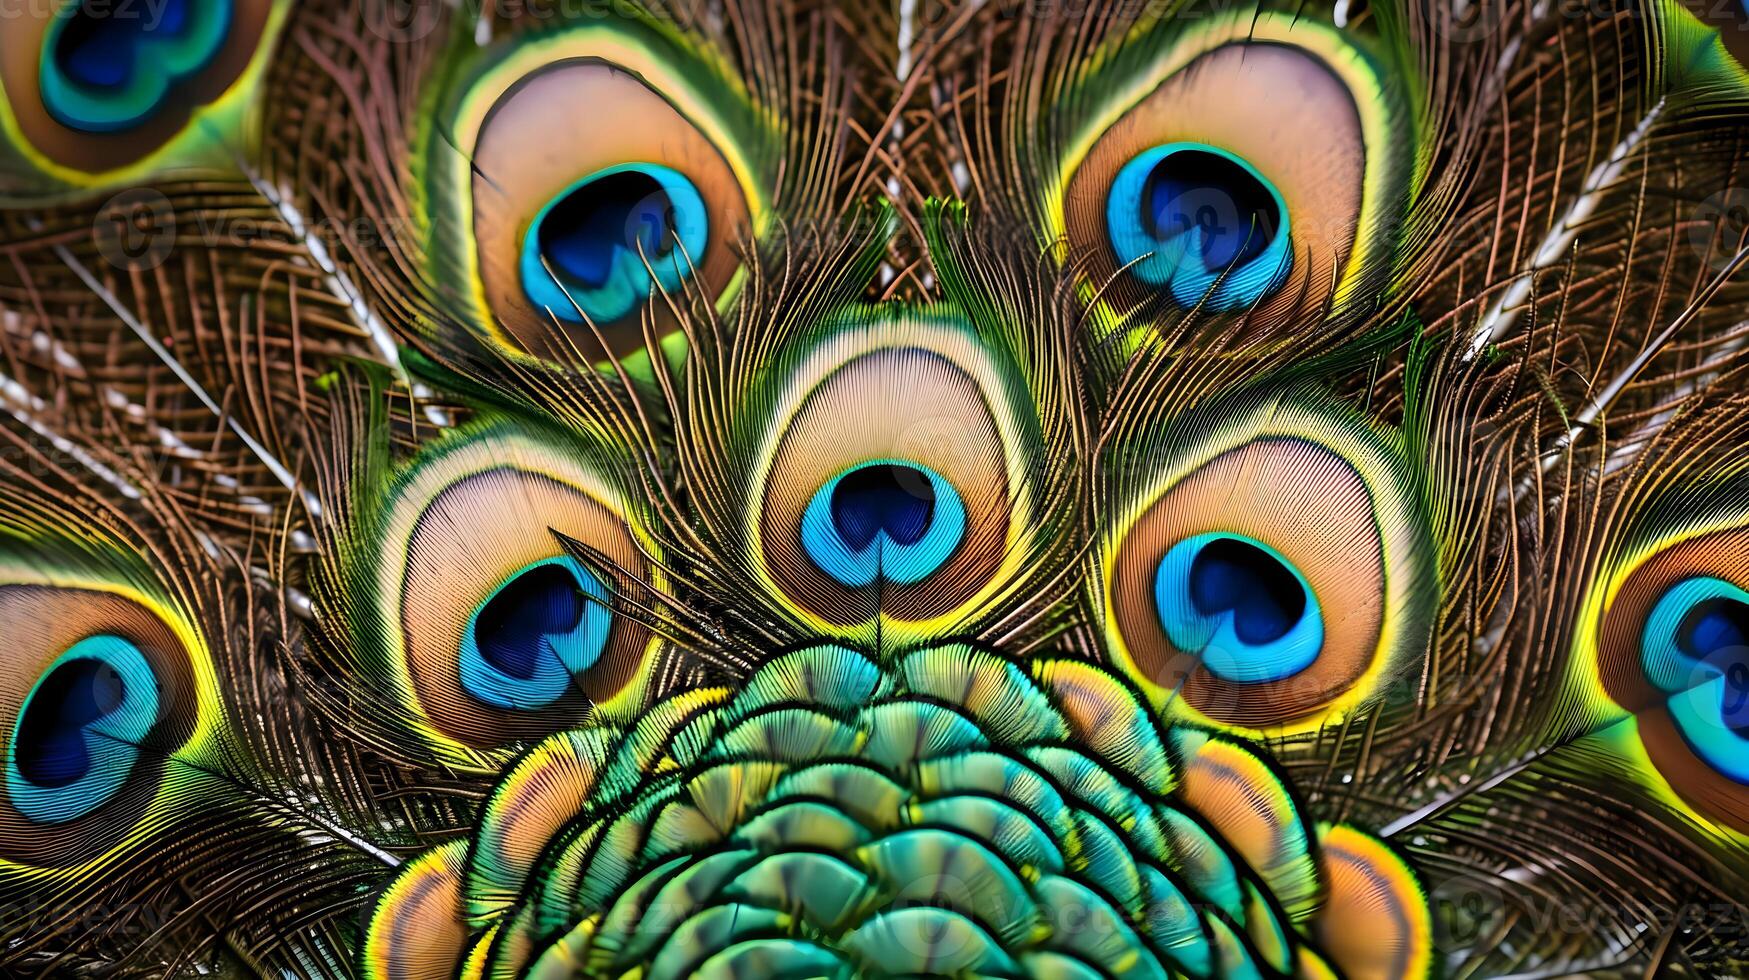 AI generated a close up view of a peacock's feathers photo